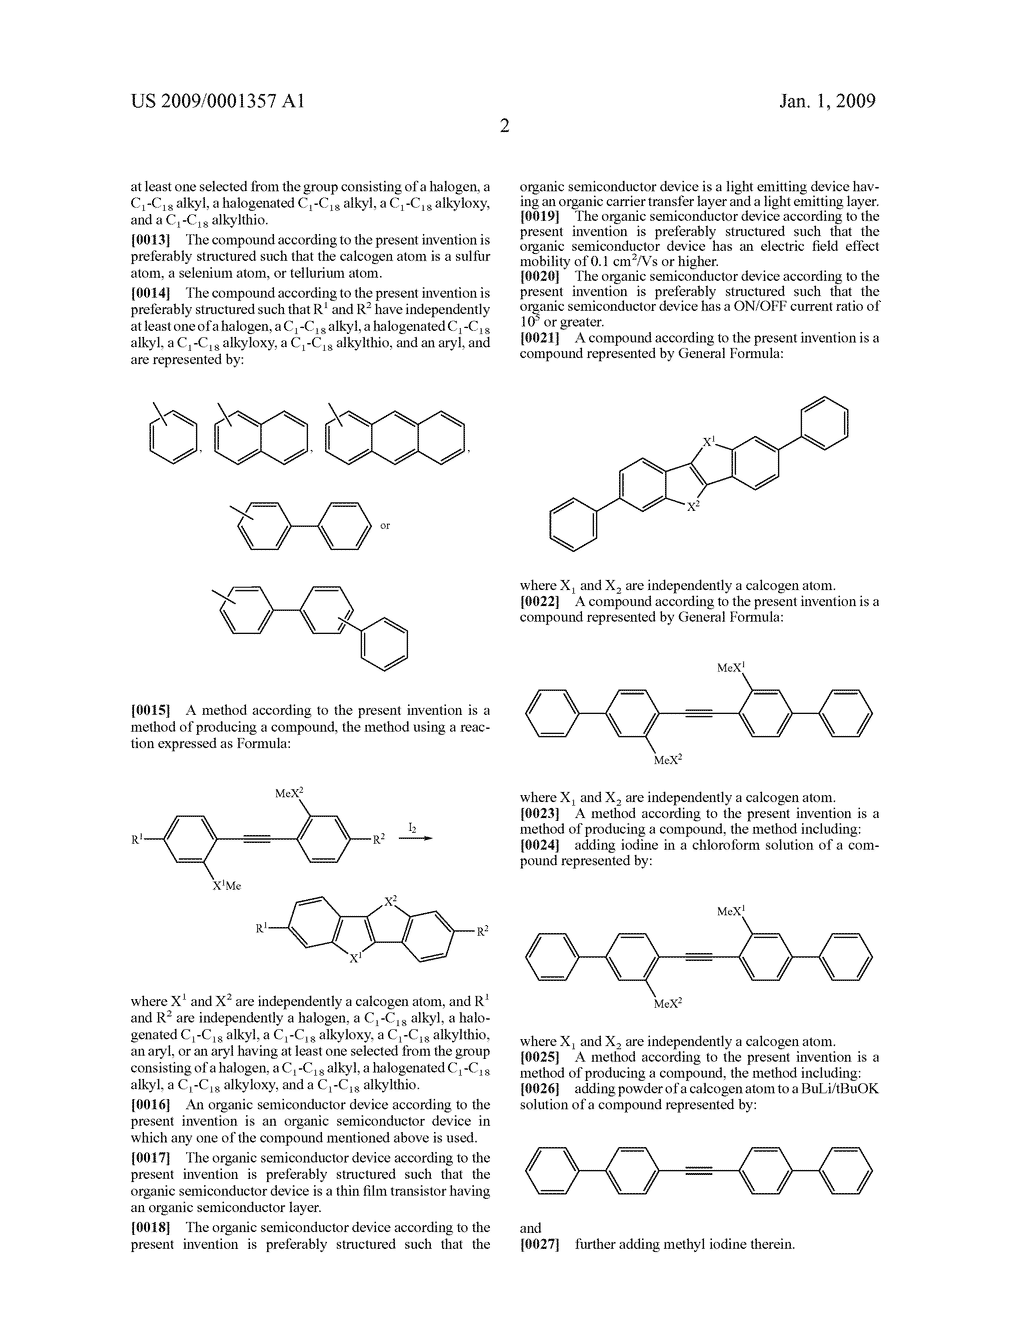 Novel Condensed Polycyclic Aromatic Compound and Use Thereof - diagram, schematic, and image 07